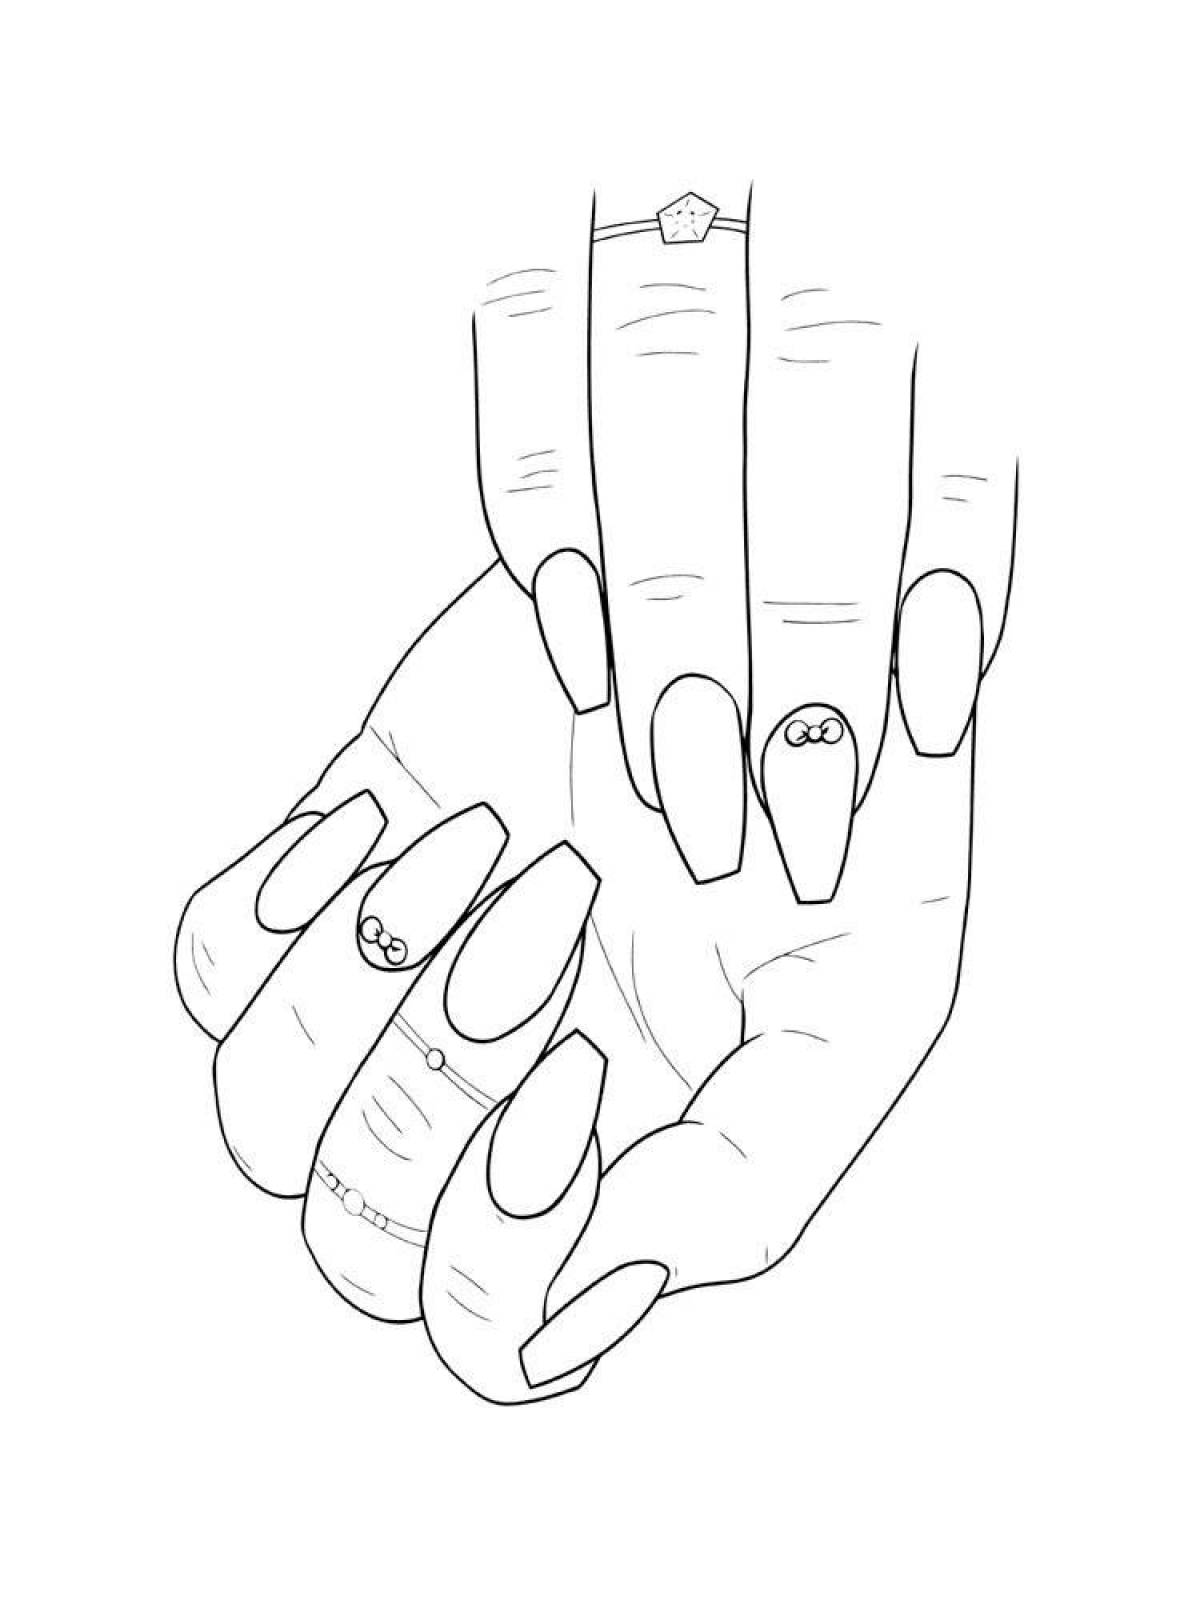 Coloring book sparkling hand with nails